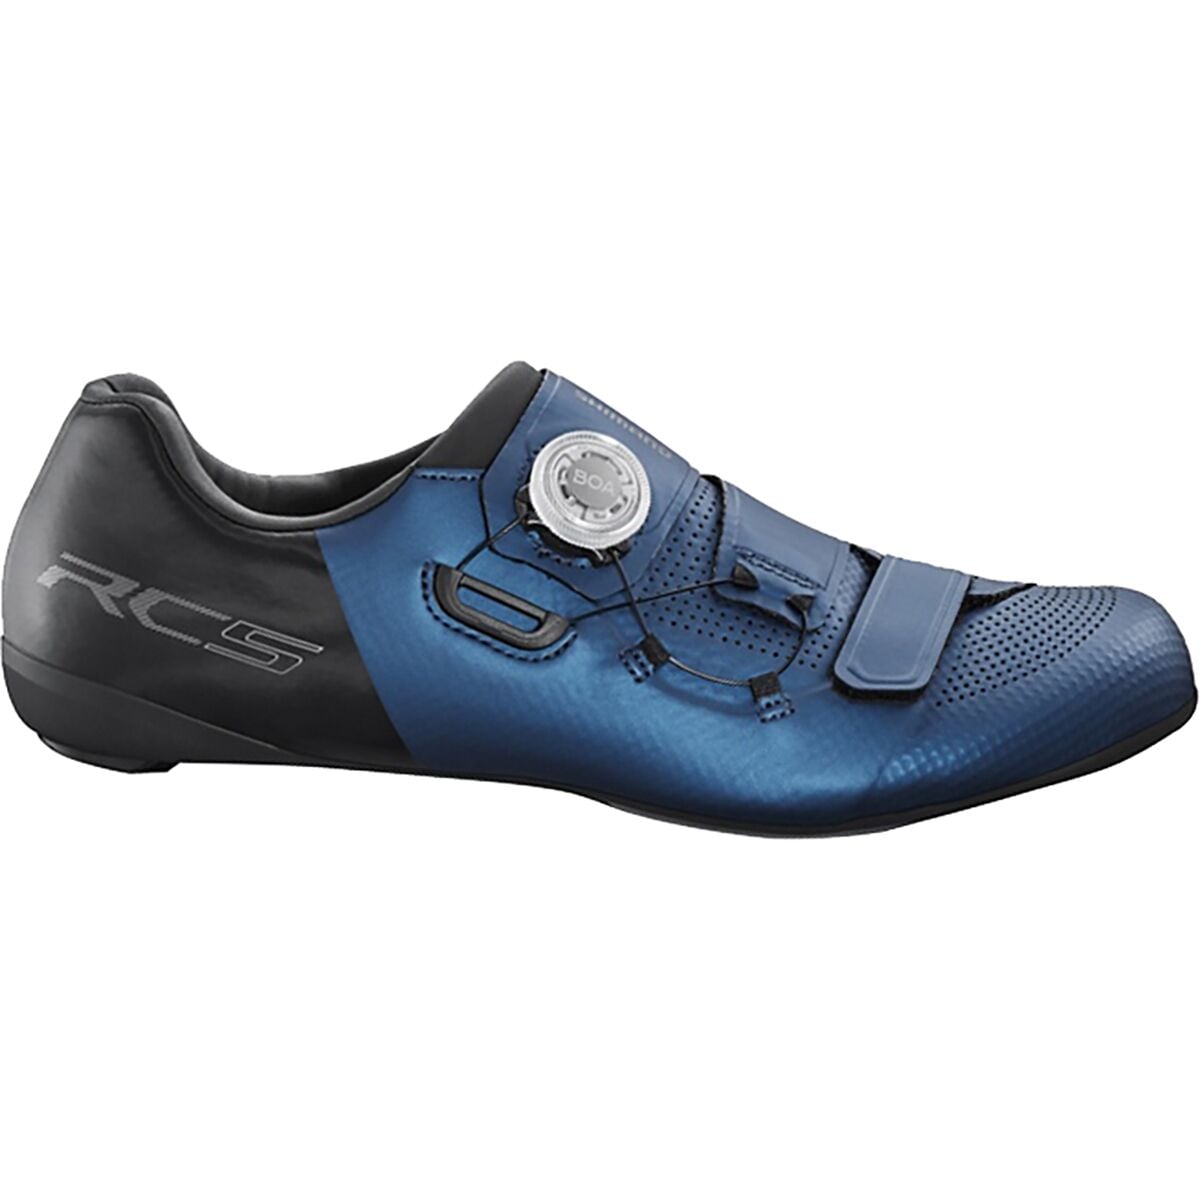 Shimano RC502 Limited Edition Cycling Shoe - Men's